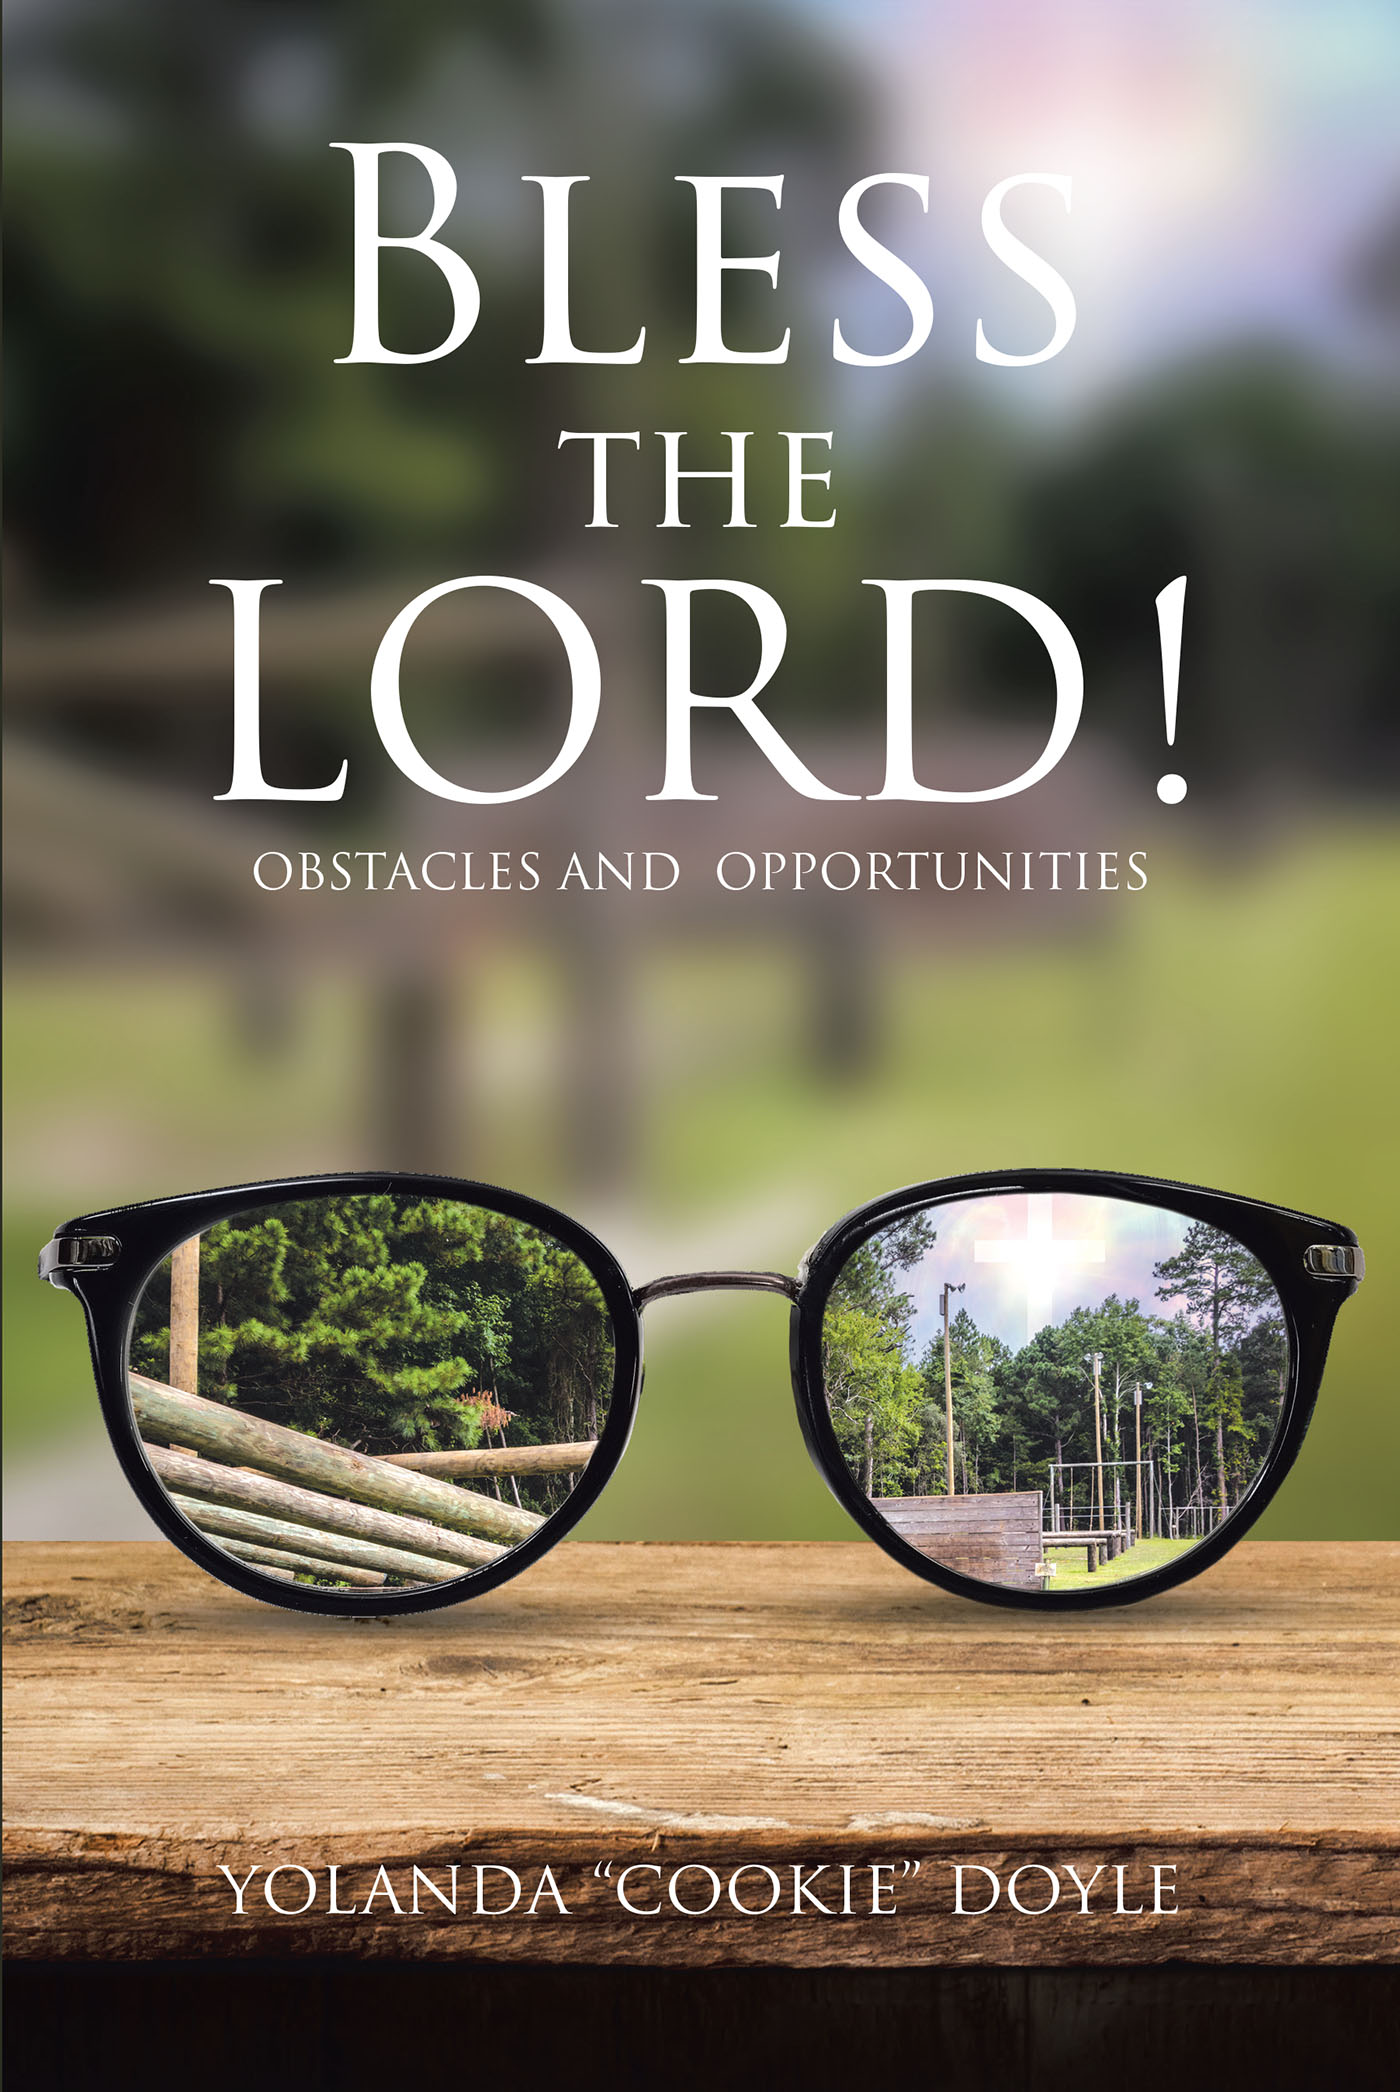 Yolanda “Cookie” Doyle’s Newly Released “Bless The LORD!: Obstacles and Opportunities” is an Interactive Resource for Biblical Study